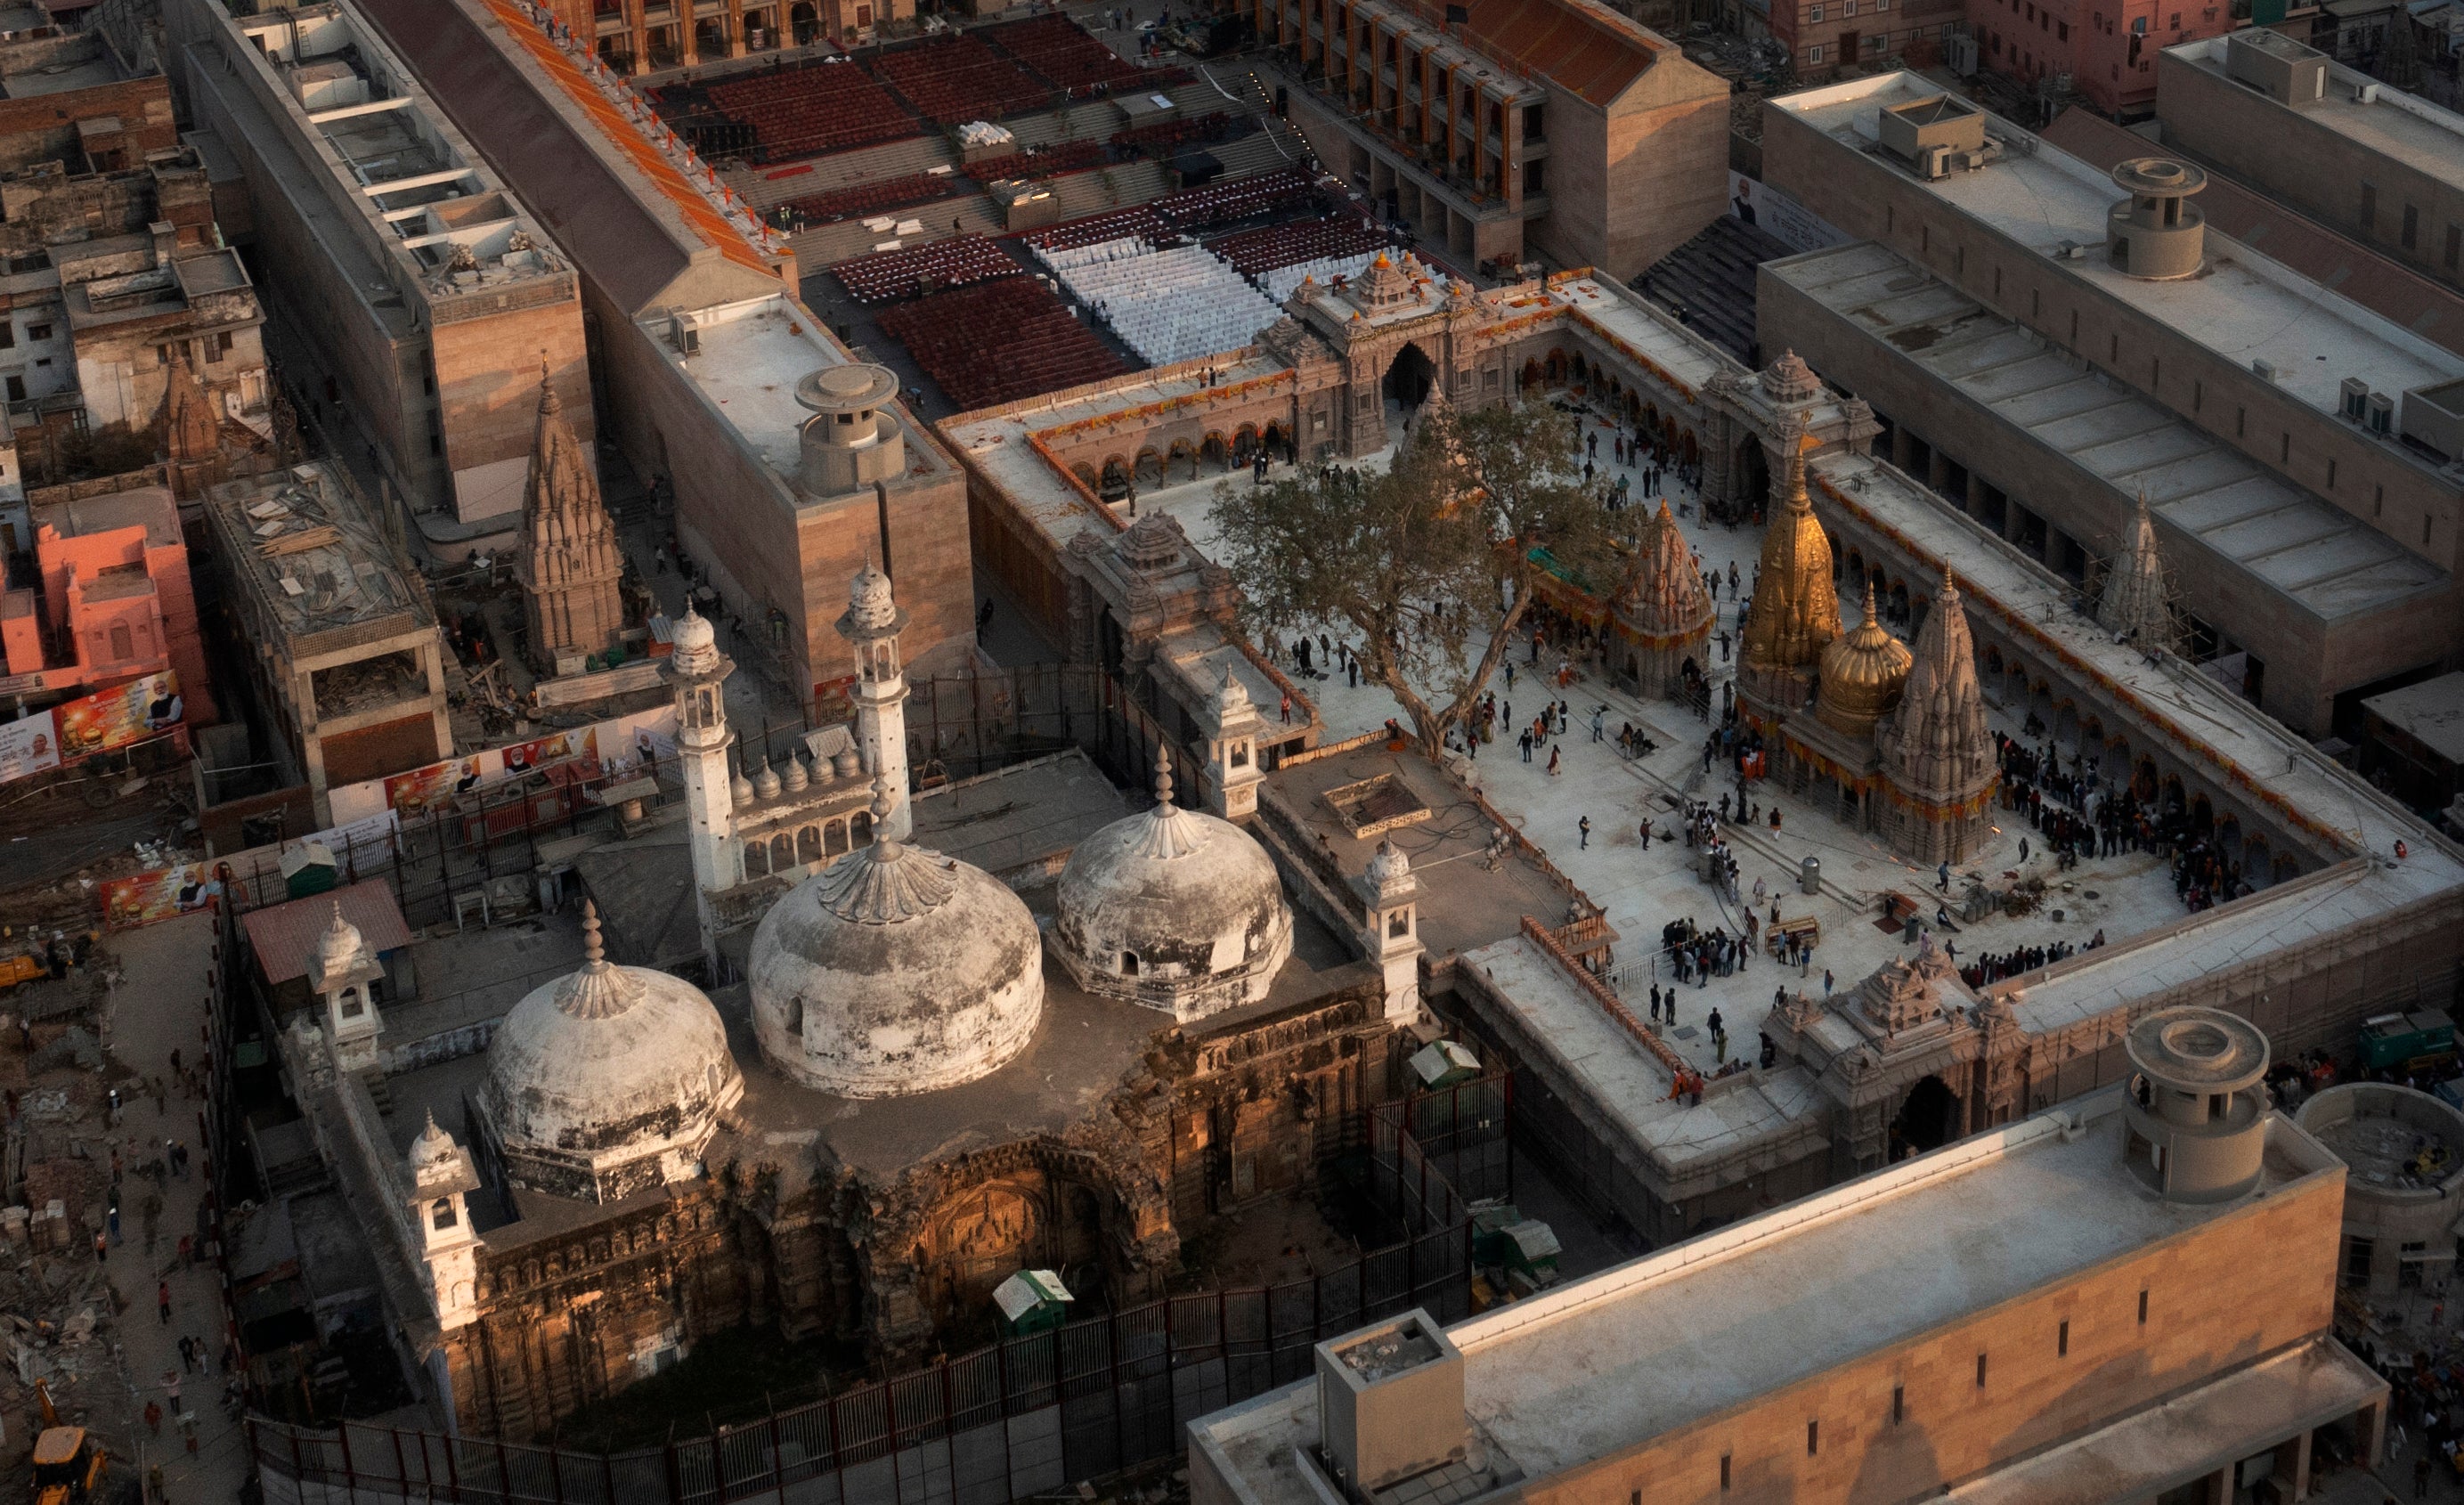 An Aerial view shows Gyanvapi mosque (left) and Kashiviswanath temple on the banks of the river Ganga in Varanasi city